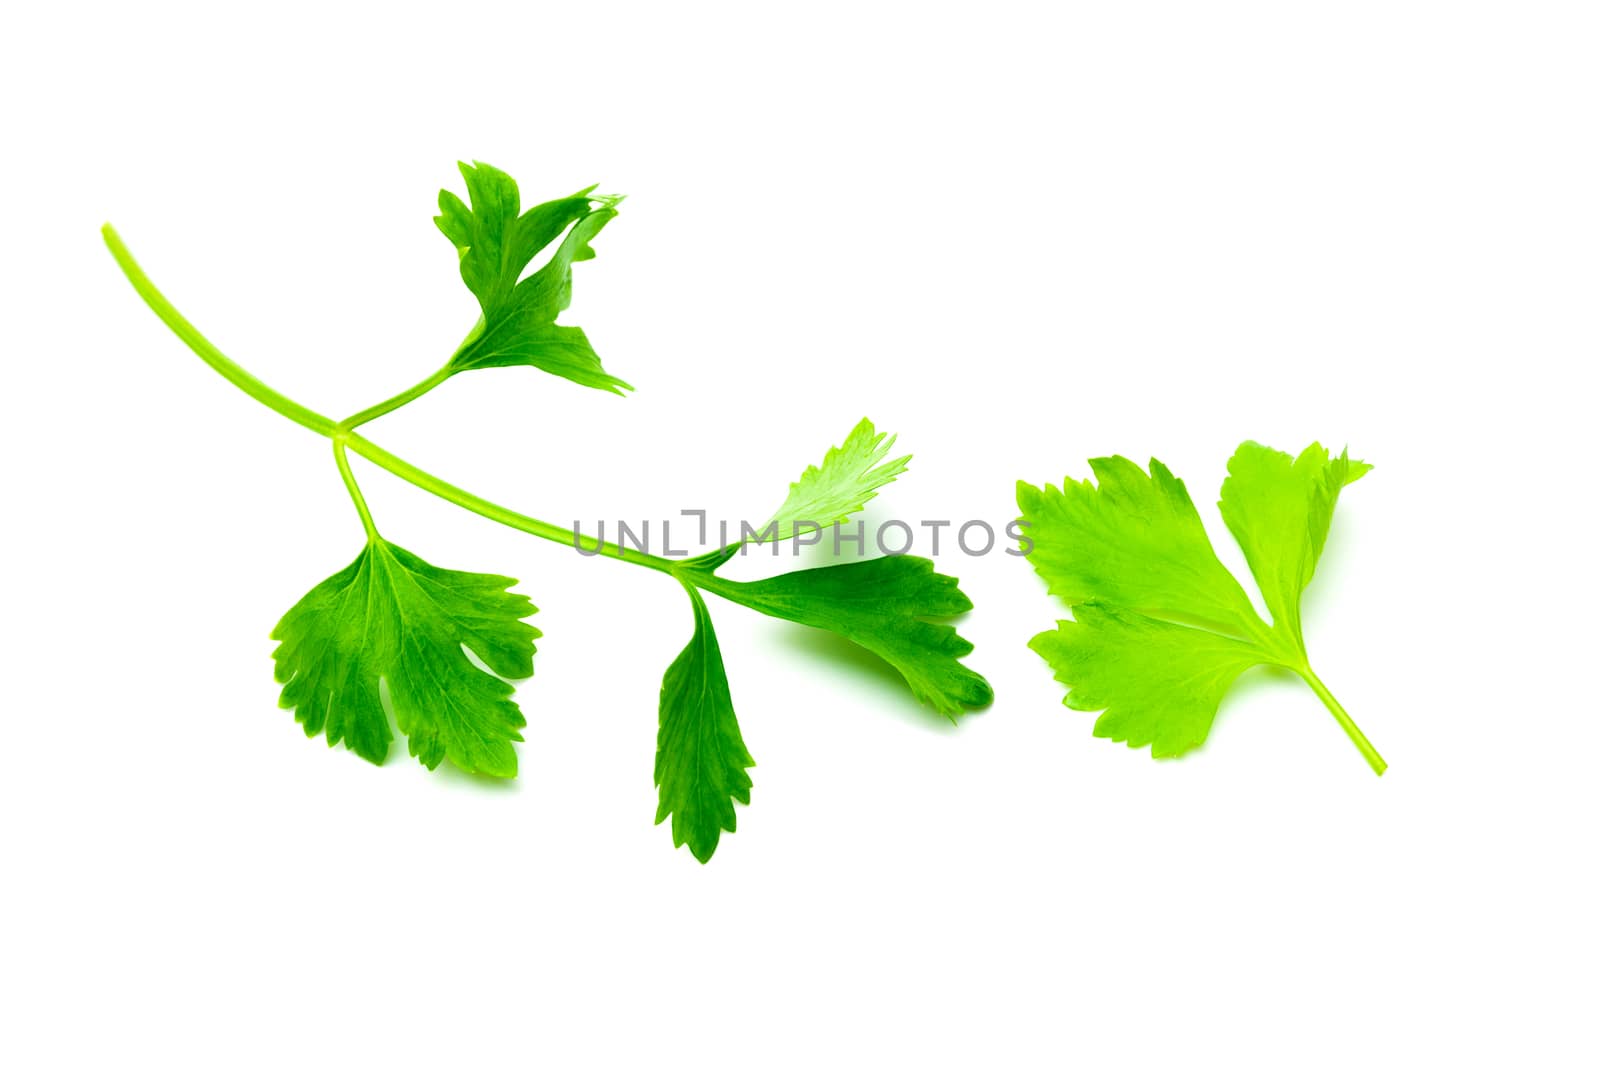 Green Celery leaves isolated on white background. Top view and close up of Celery leaves.